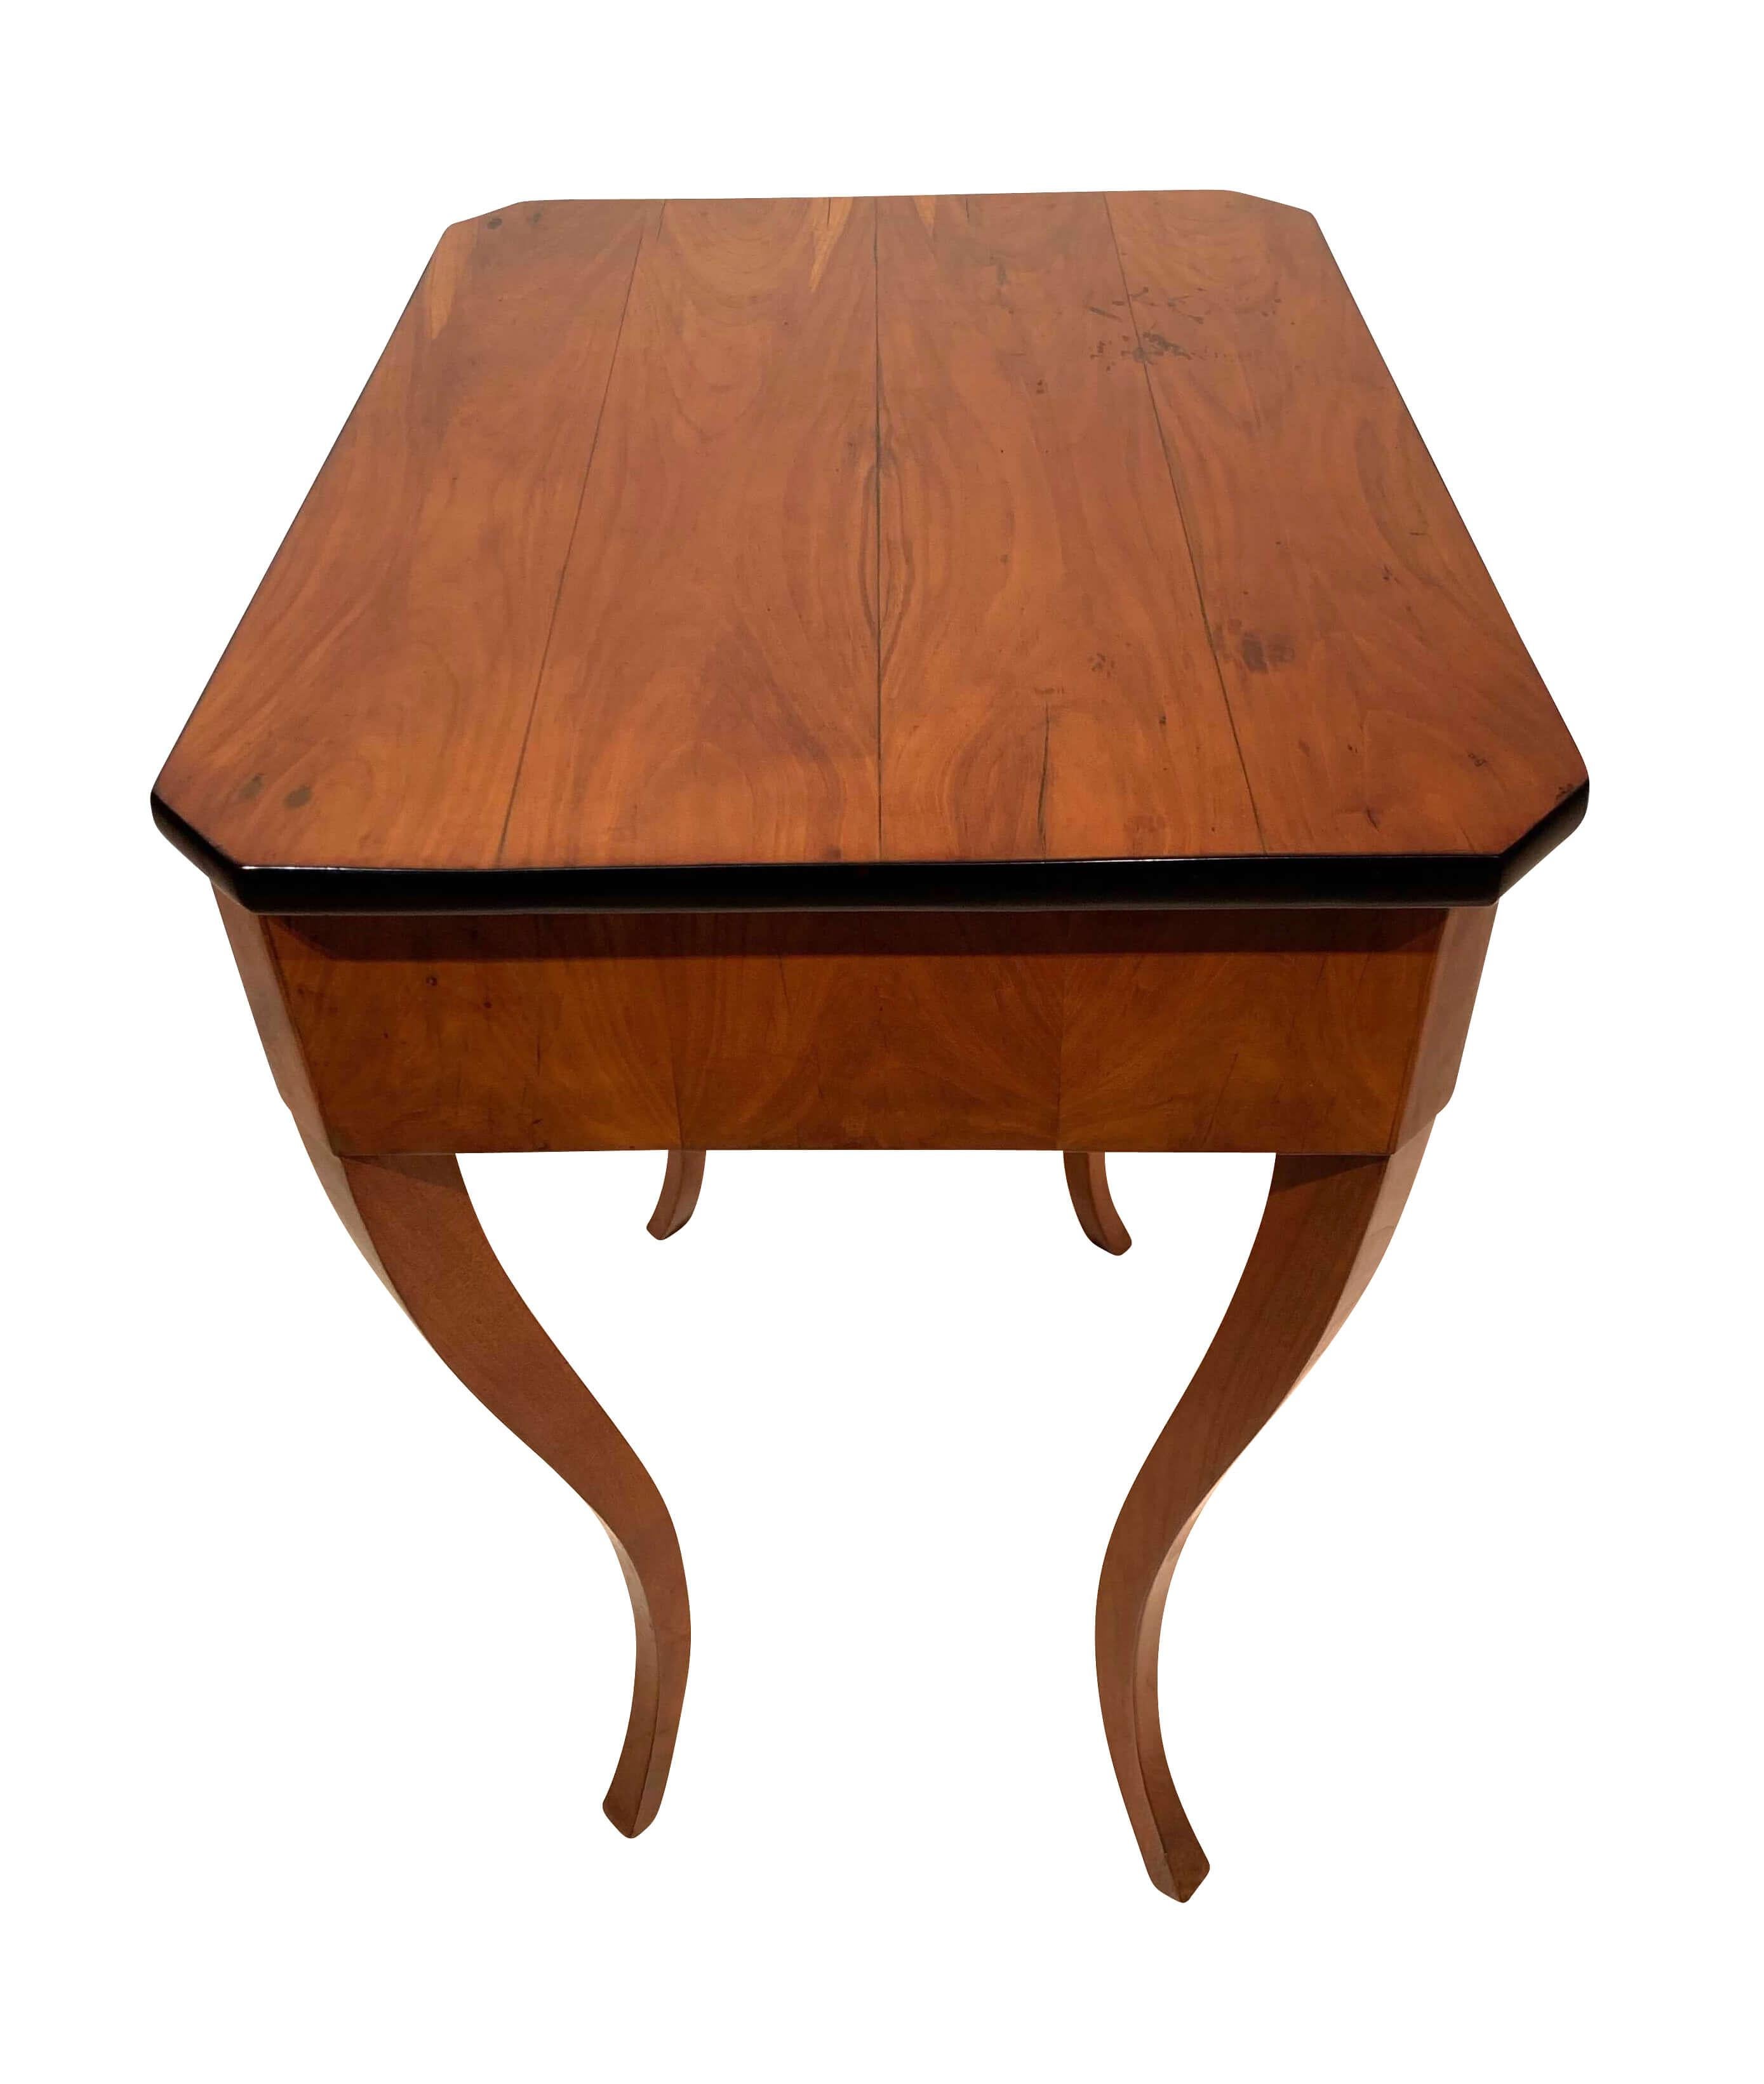 Early 19th Century Biedermeier Side Table with Drawer, Cherry Veneer, South Germany, circa 1830